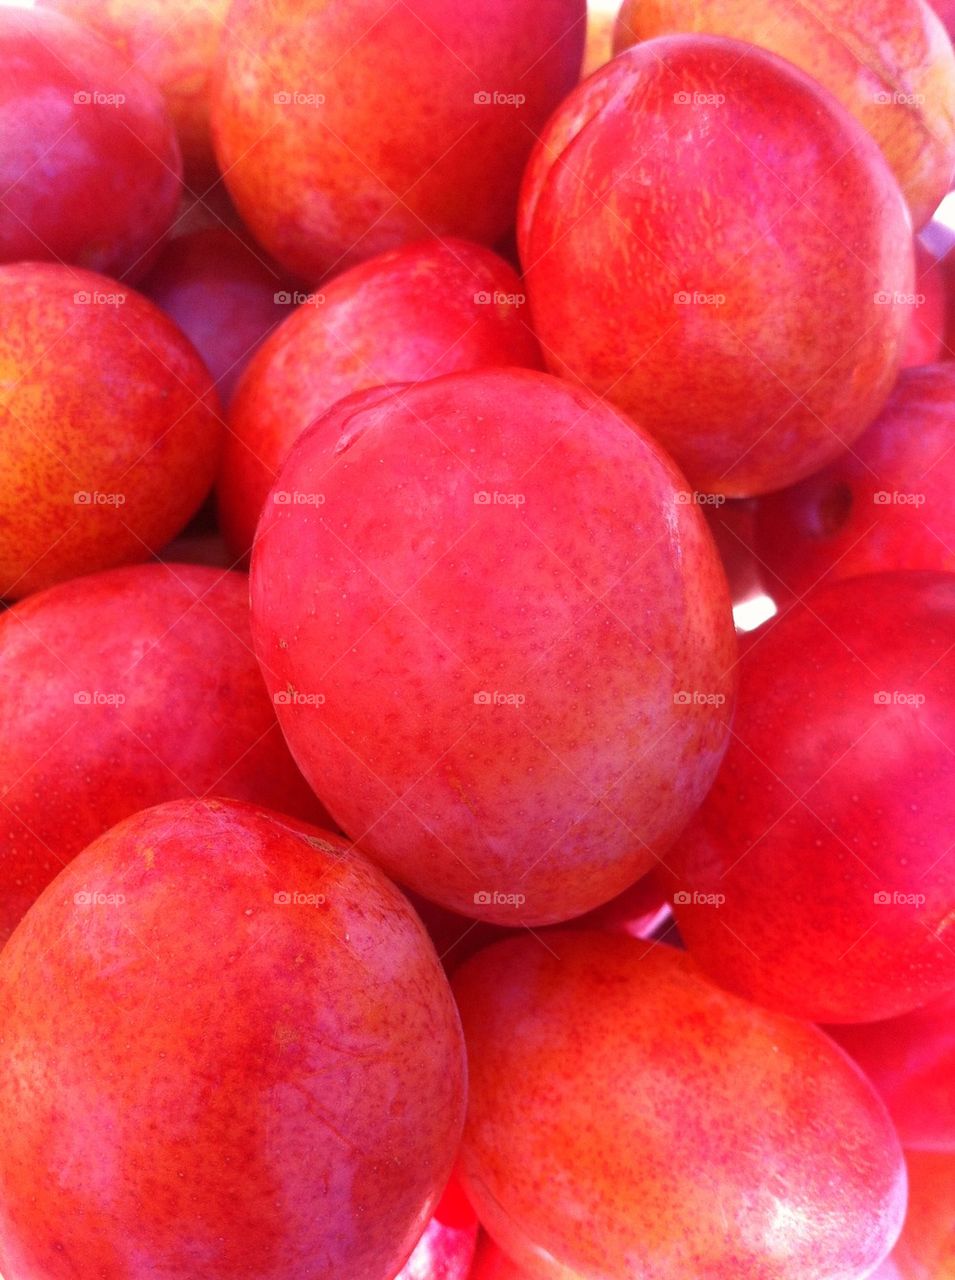 Harvested red Victoria plums.